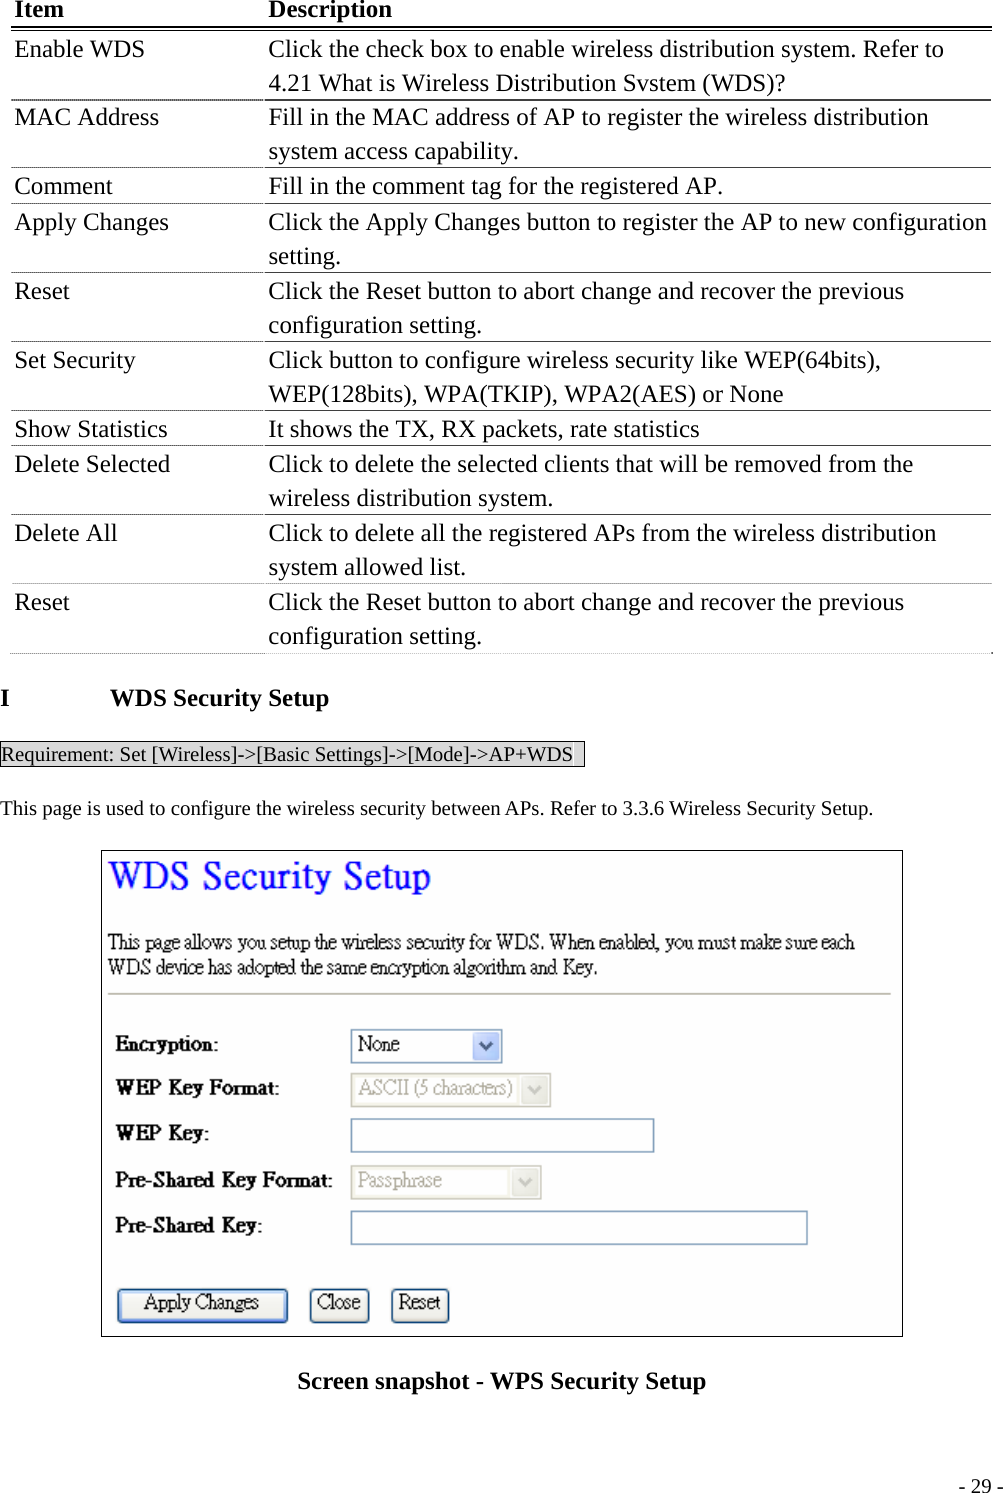  Item Description Enable WDS  Click the check box to enable wireless distribution system. Refer to 4.21 What is Wireless Distribution Svstem (WDS)? MAC Address  Fill in the MAC address of AP to register the wireless distribution system access capability. Comment   Fill in the comment tag for the registered AP. Apply Changes  Click the Apply Changes button to register the AP to new configuration setting. Reset    Click the Reset button to abort change and recover the previous configuration setting. Set Security  Click button to configure wireless security like WEP(64bits), WEP(128bits), WPA(TKIP), WPA2(AES) or None Show Statistics    It shows the TX, RX packets, rate statistics Delete Selected  Click to delete the selected clients that will be removed from the wireless distribution system. Delete All  Click to delete all the registered APs from the wireless distribution system allowed list. Reset  Click the Reset button to abort change and recover the previous configuration setting. I        WDS Security Setup Requirement: Set [Wireless]-&gt;[Basic Settings]-&gt;[Mode]-&gt;AP+WDS   This page is used to configure the wireless security between APs. Refer to 3.3.6 Wireless Security Setup.  Screen snapshot - WPS Security Setup  - 29 -